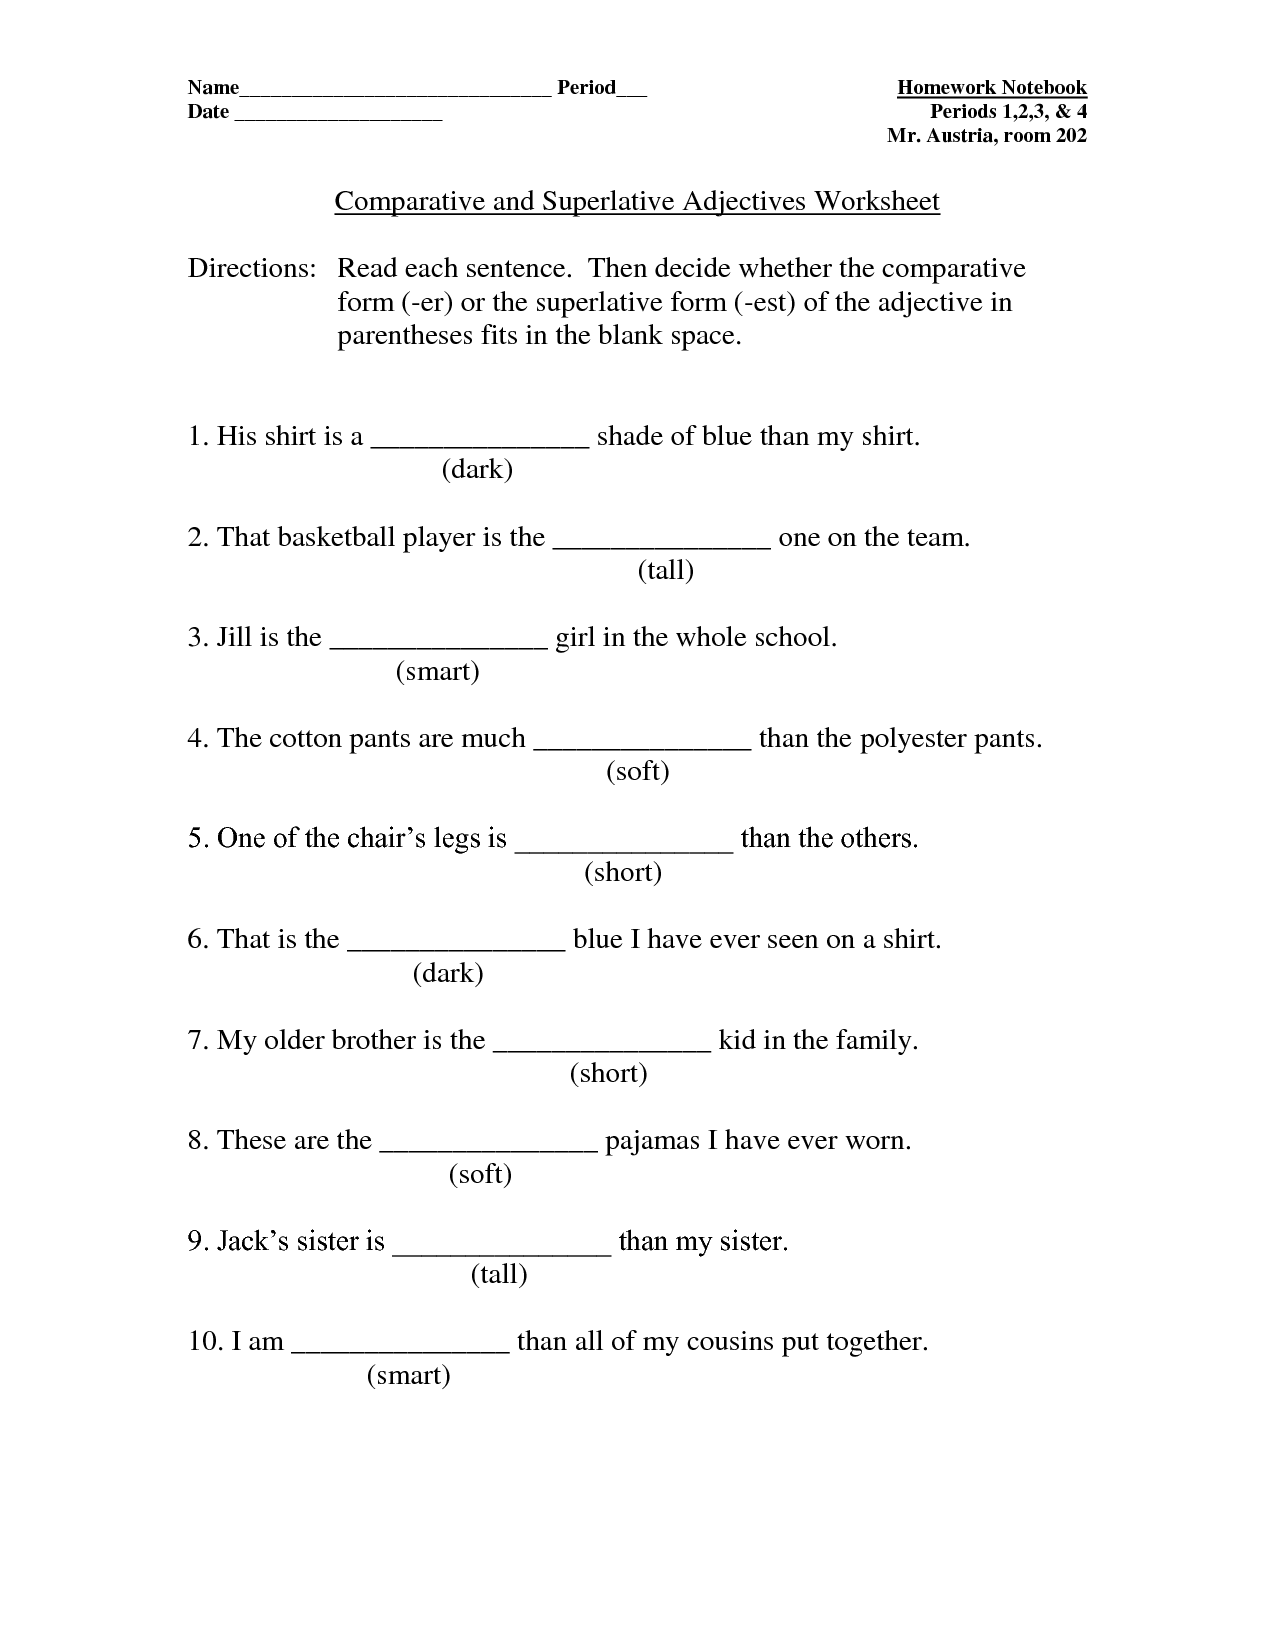 13-best-images-of-comparatives-and-superlative-worksheets-easy